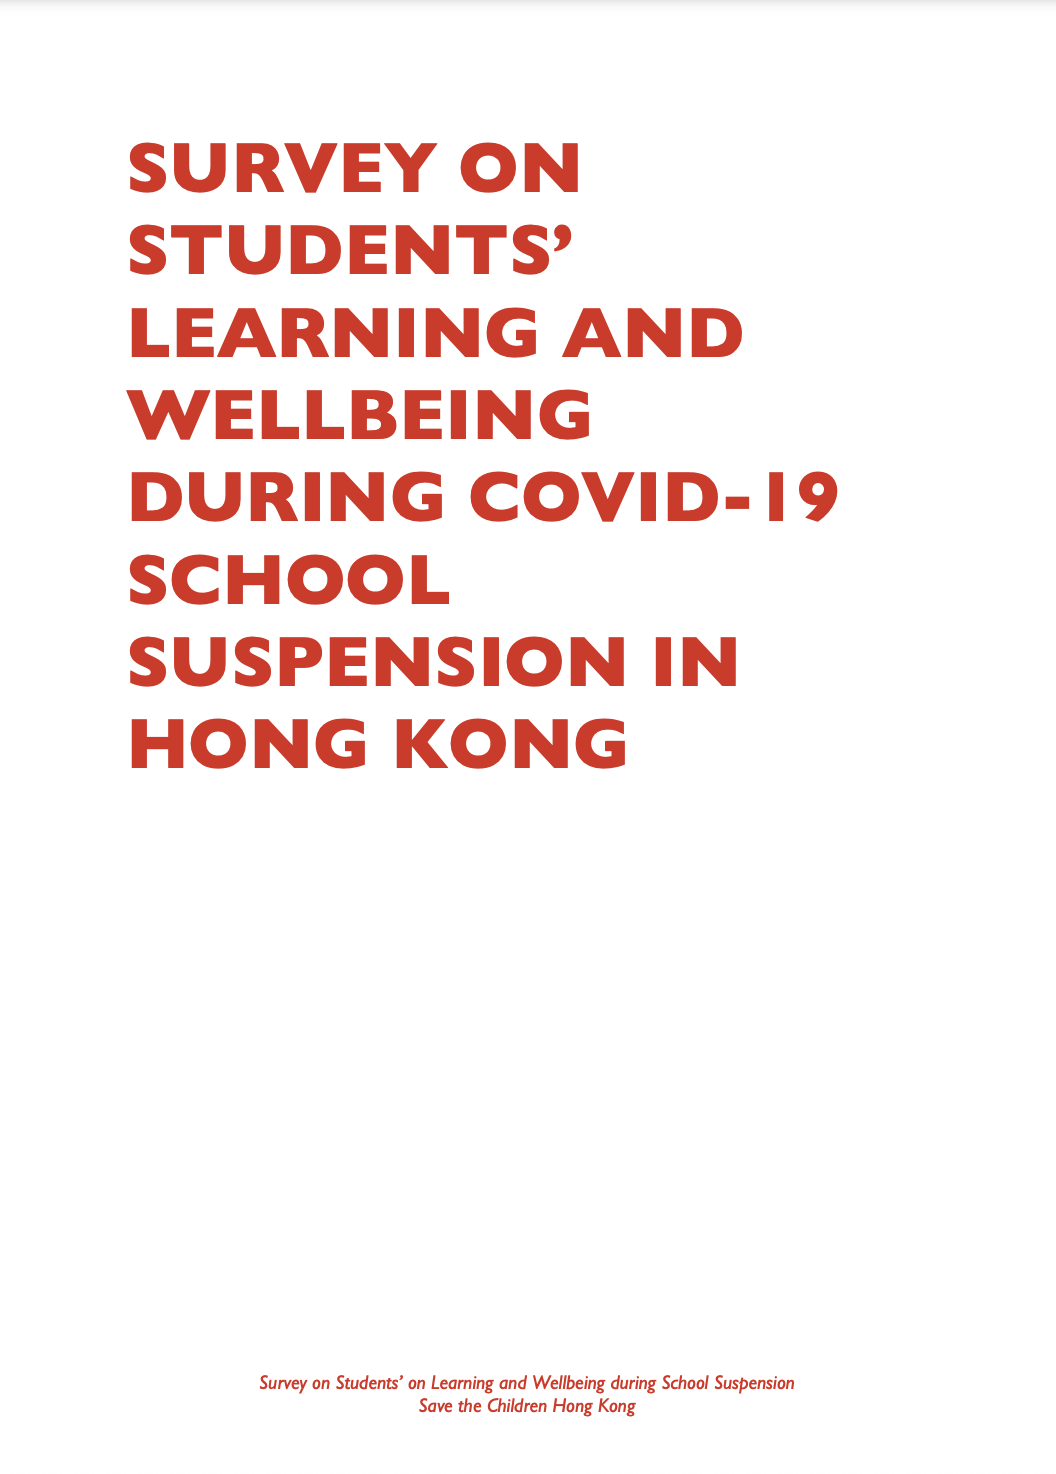 Detailed Survey Results Summary of Survey on Students’ Learning and Wellbeing during COVID-19 School Suspension in Hong Kong（只提供英文版）